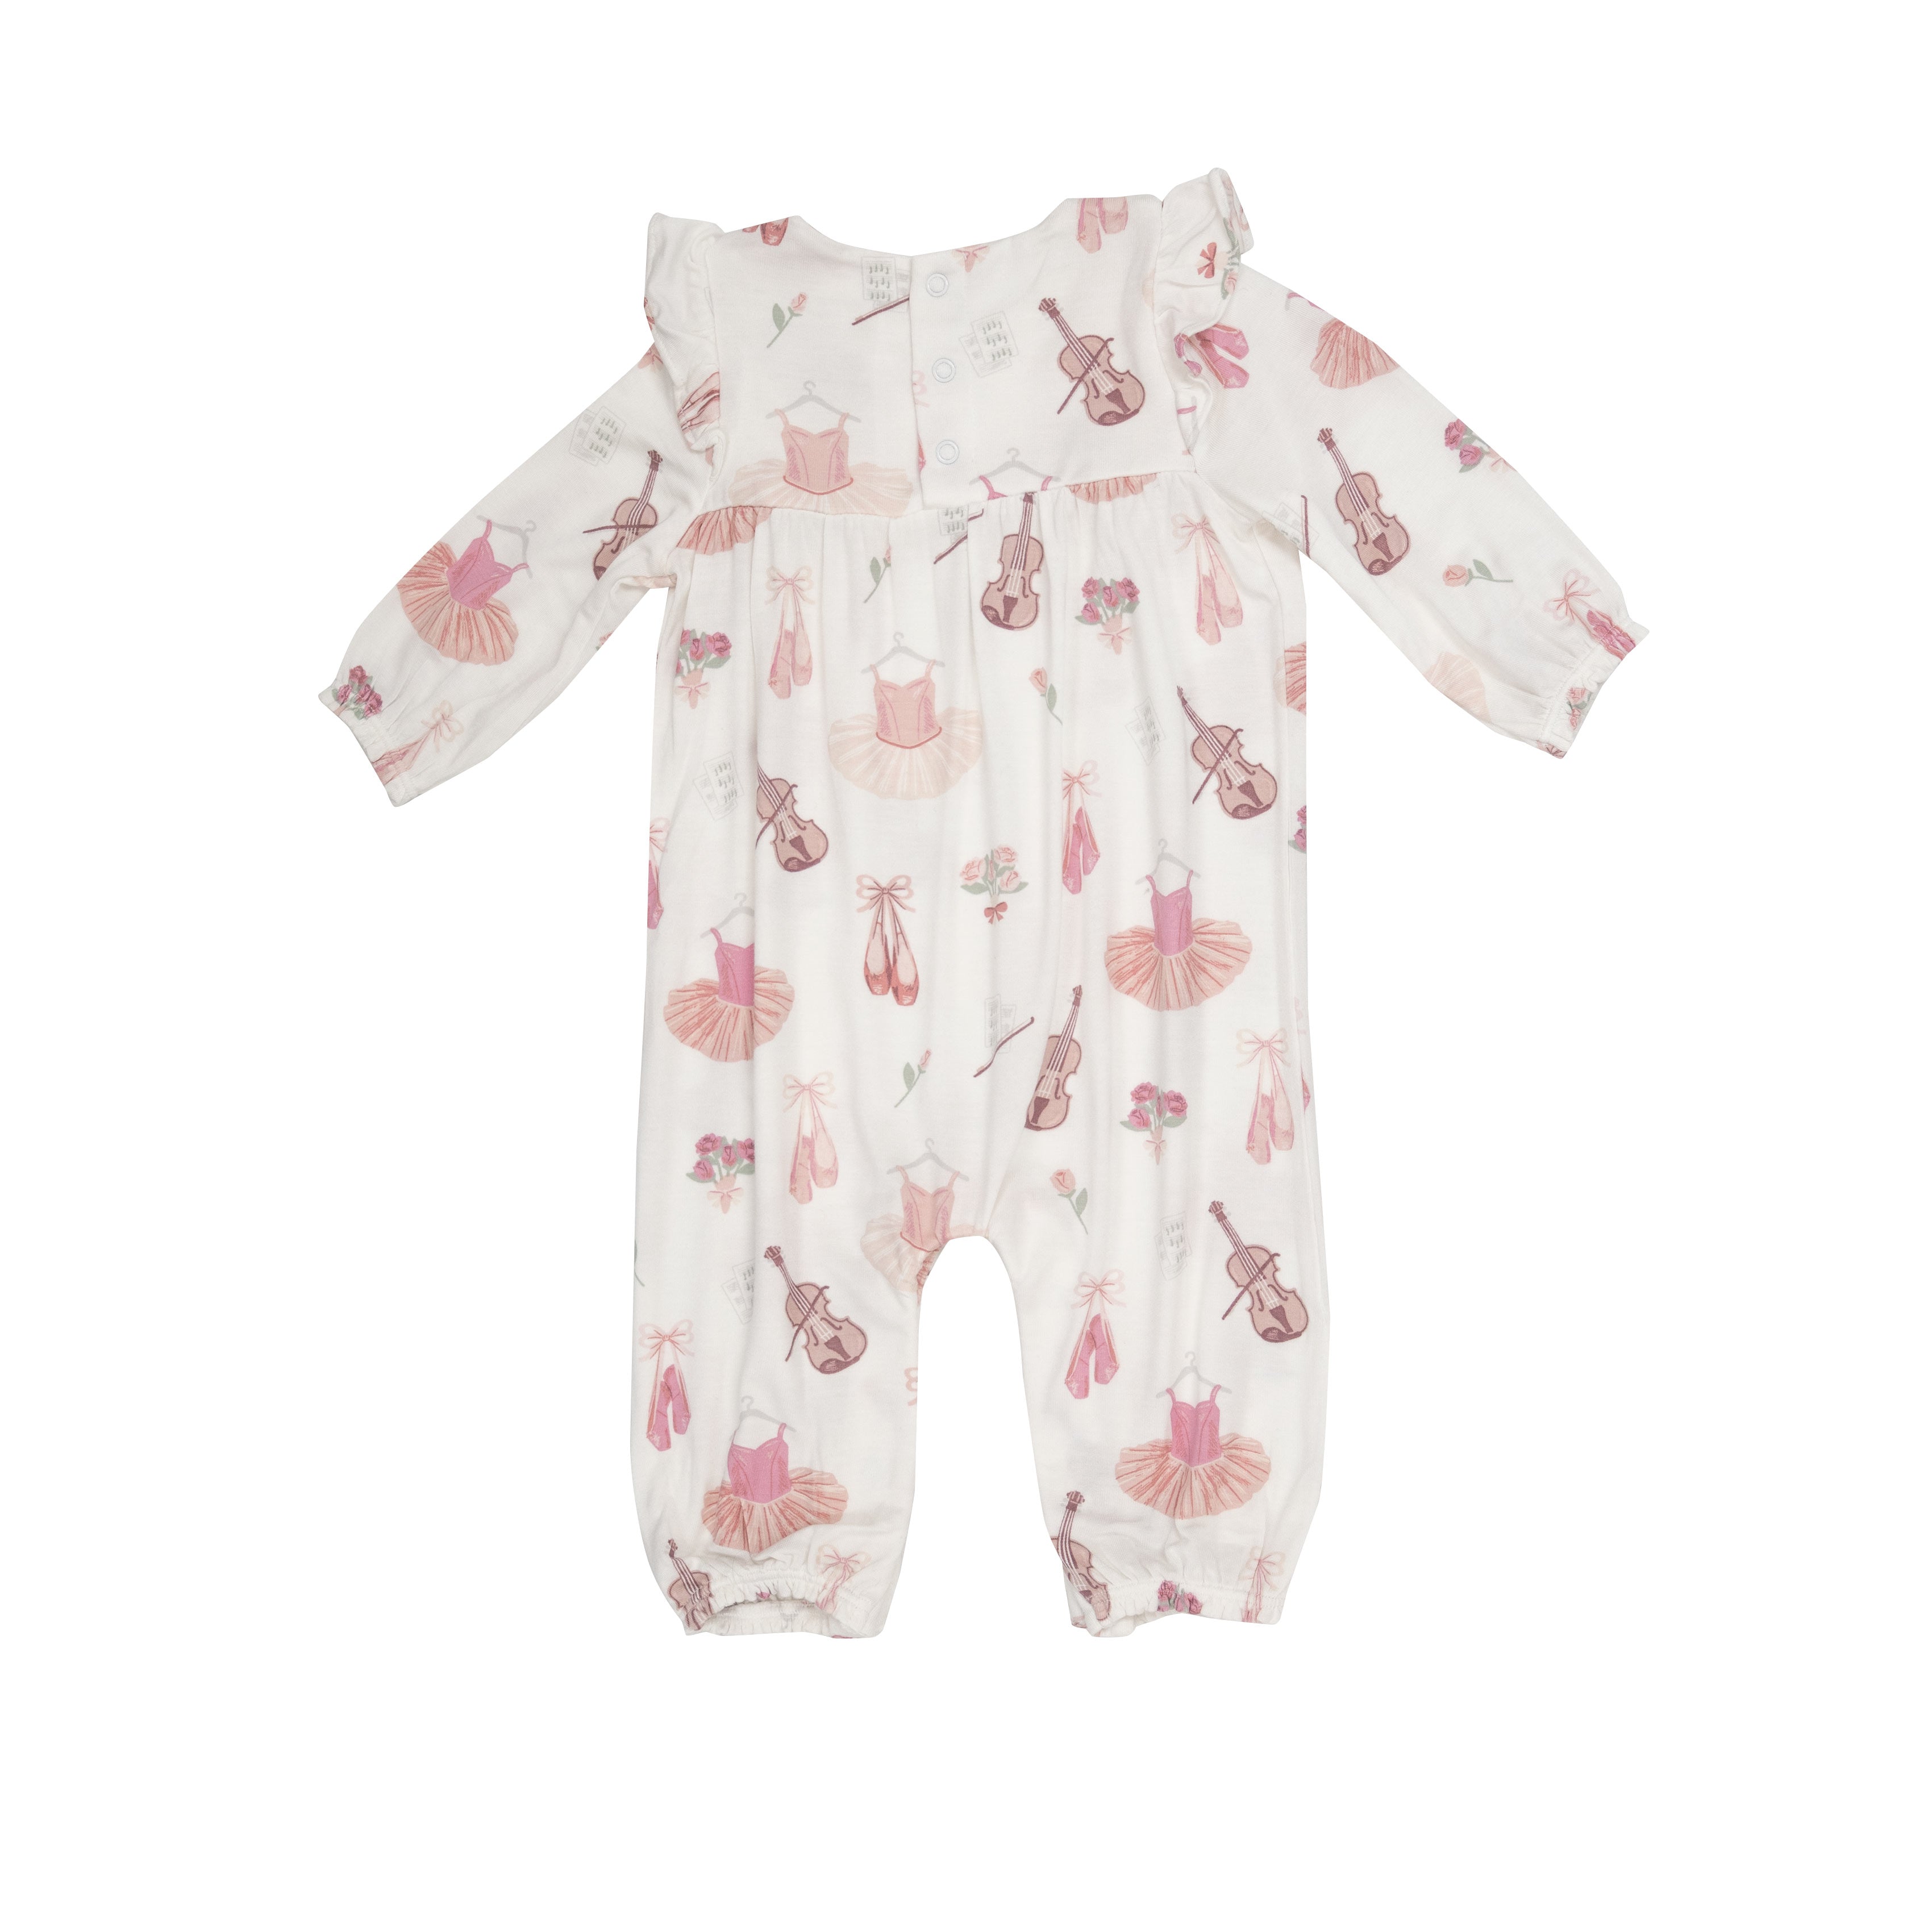 white ruffle sleeve romper with pink ballet print, violin and ballet slippers